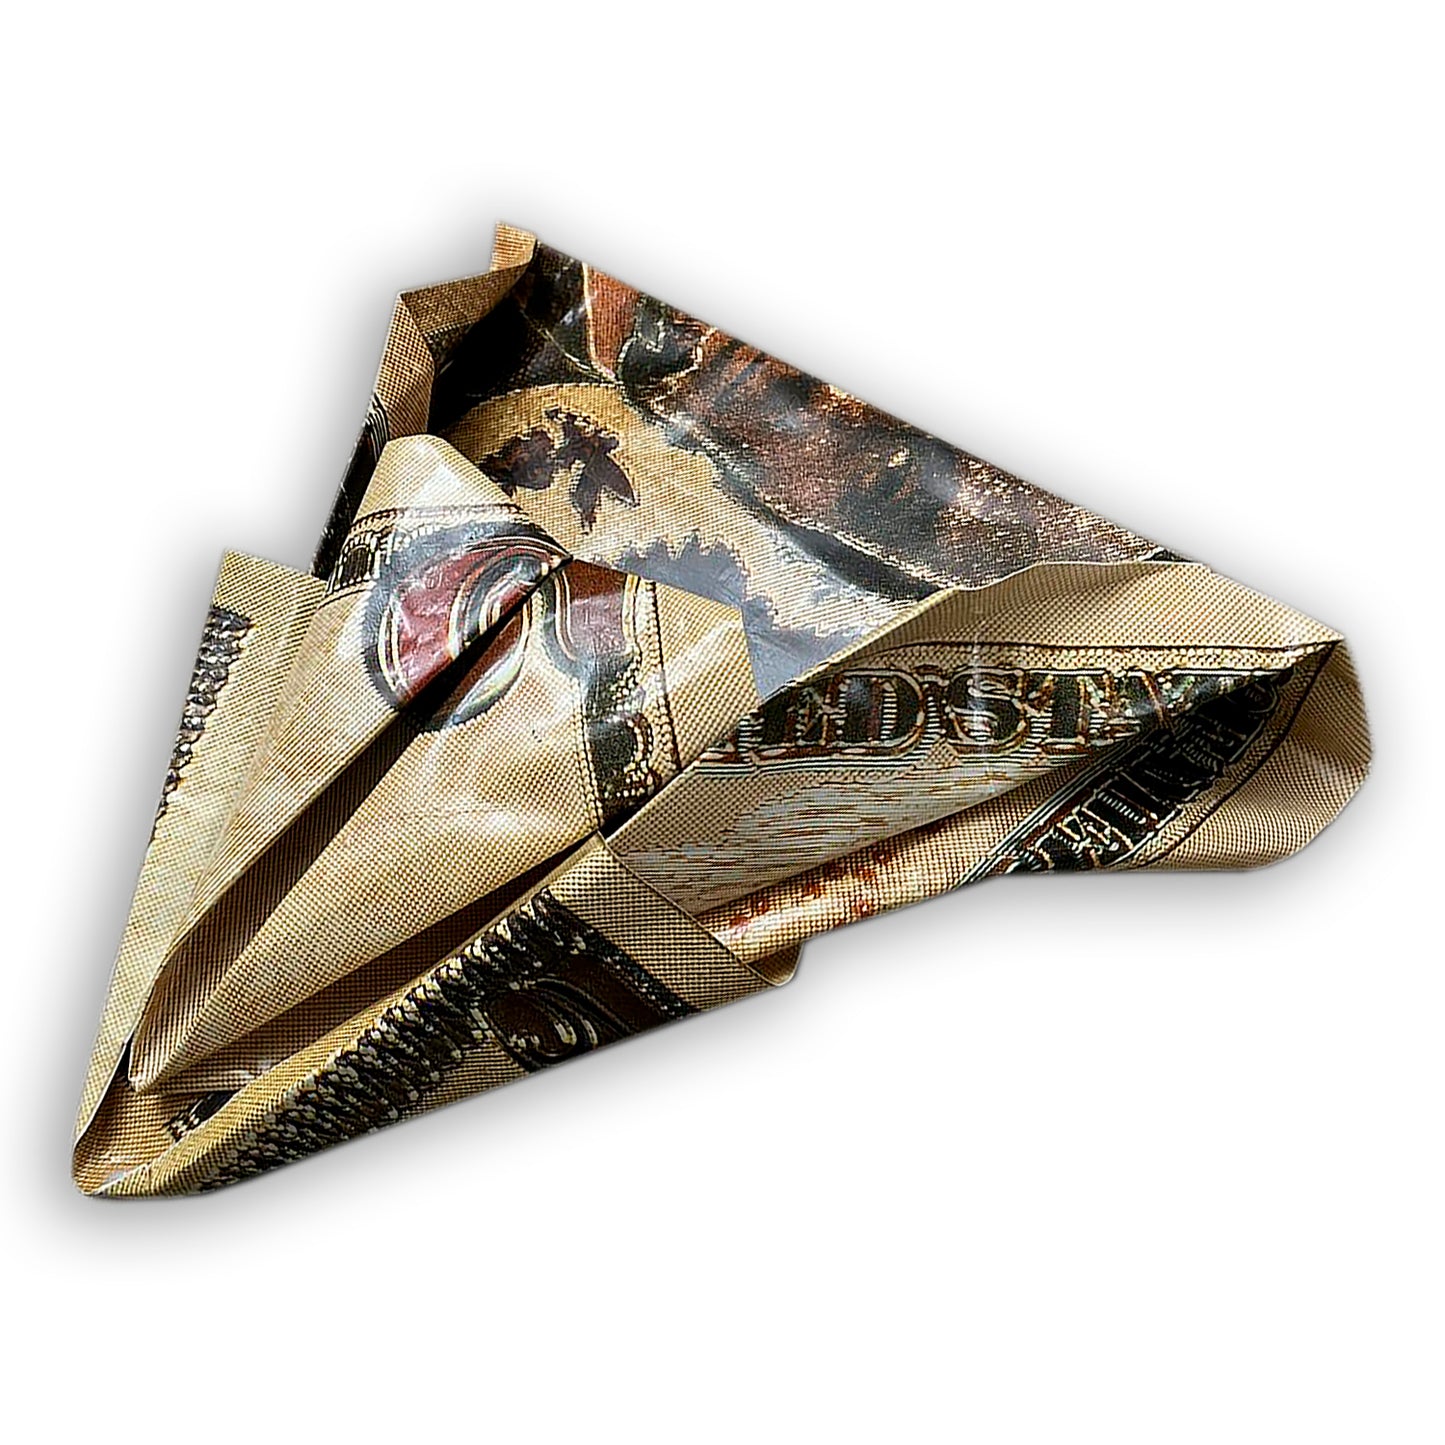 Origami, decoration, art, handmade ships in photographic paper, covered in resin